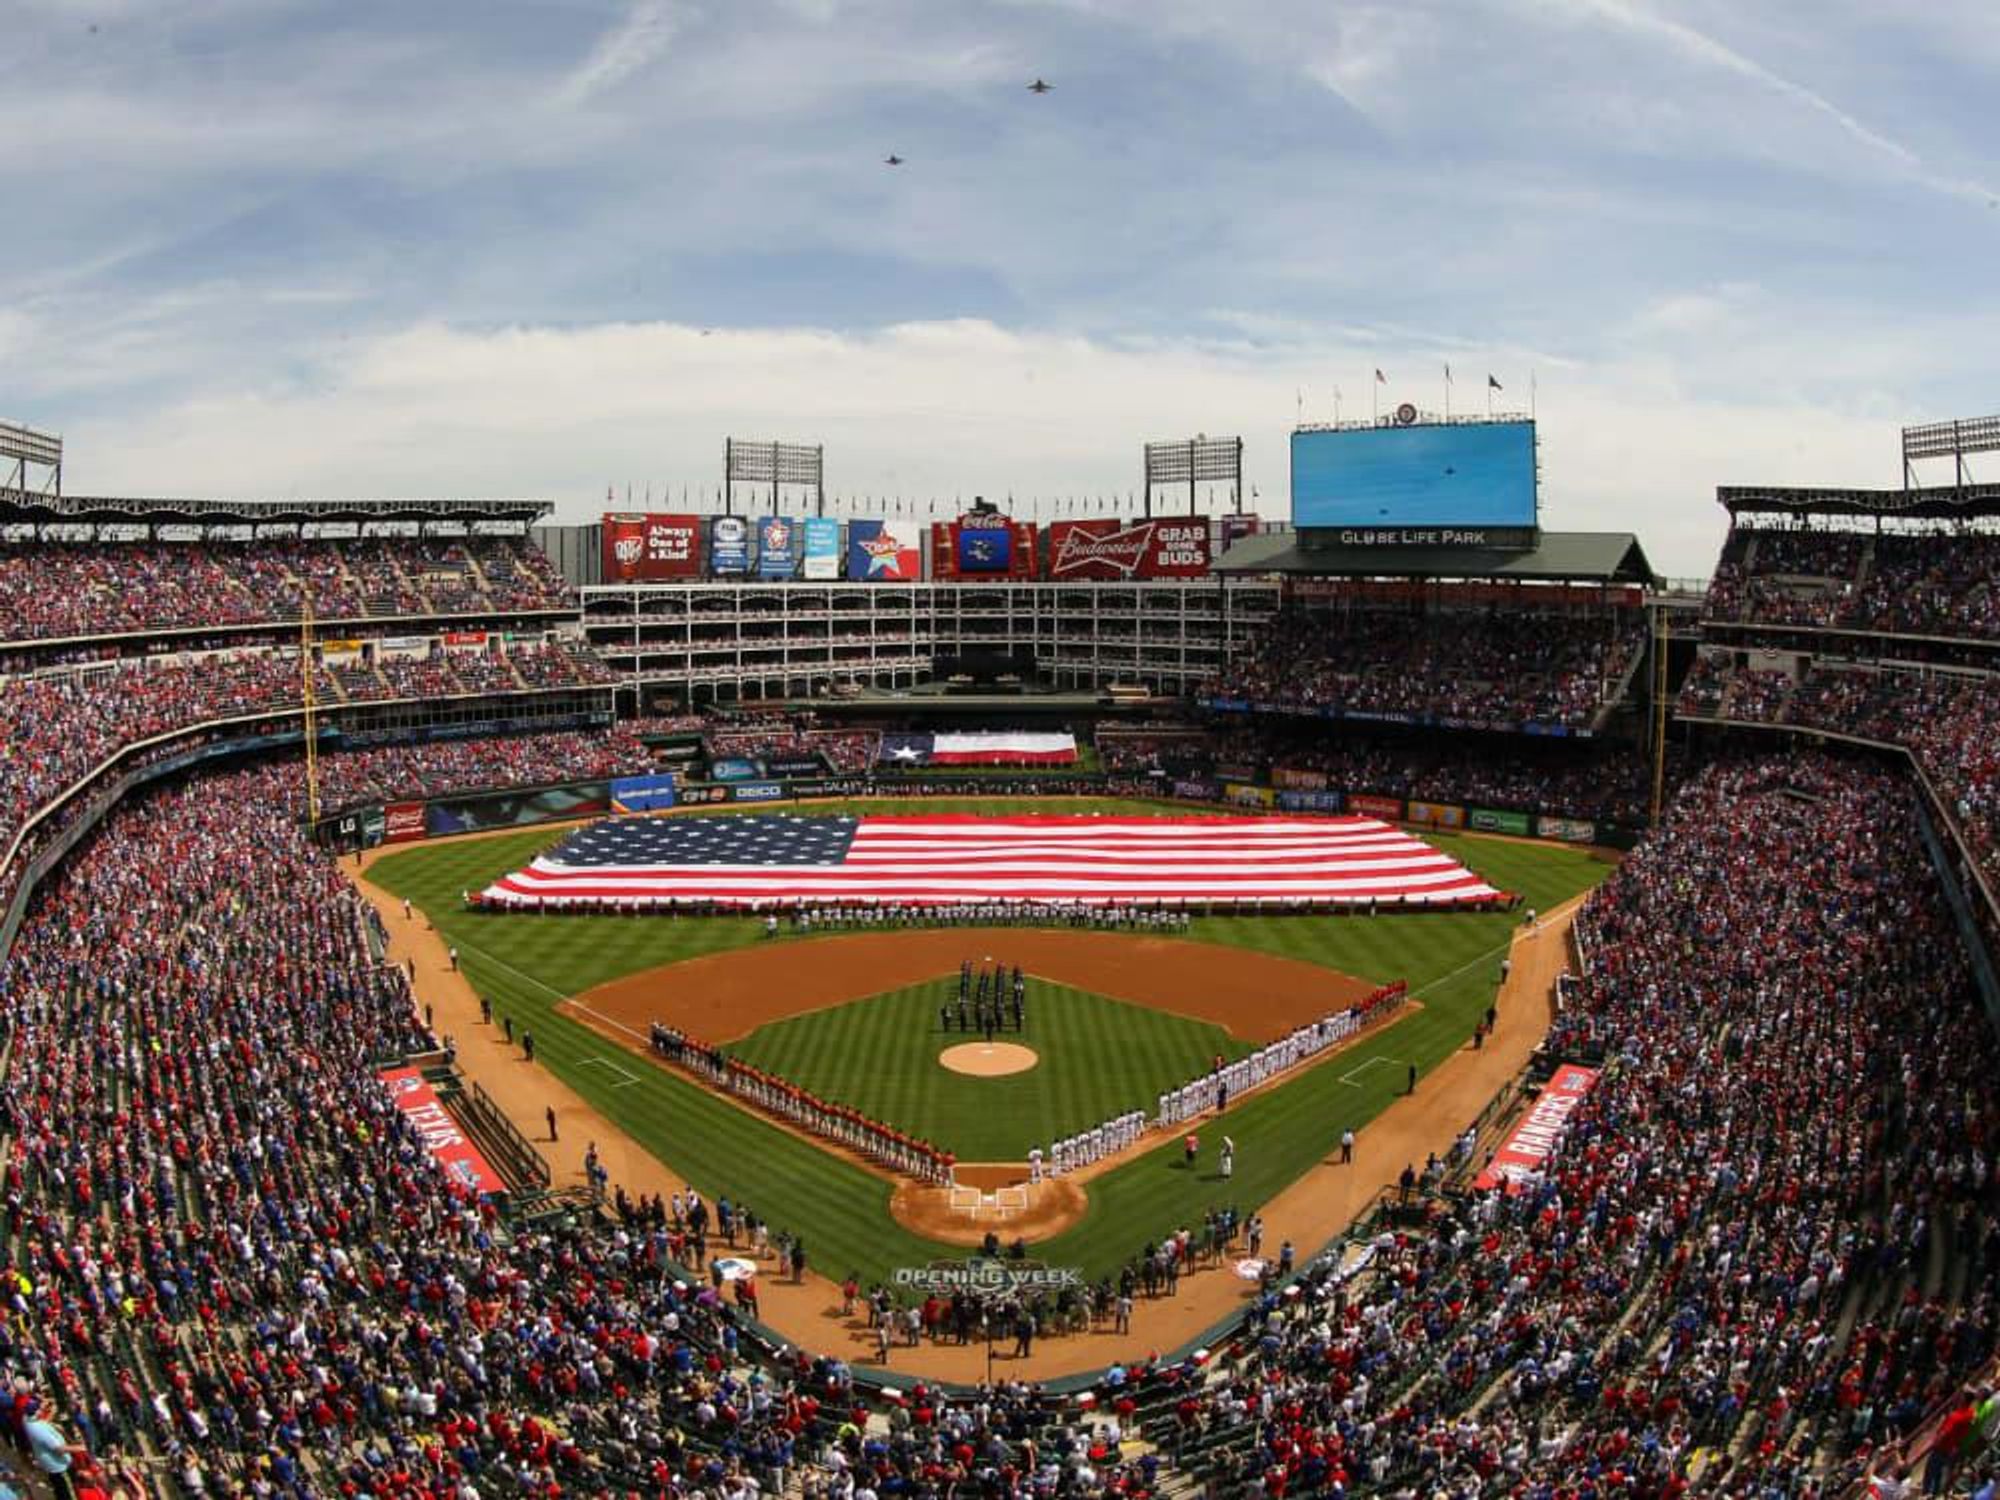 Globe Life Park in Arlington on opening day 2015